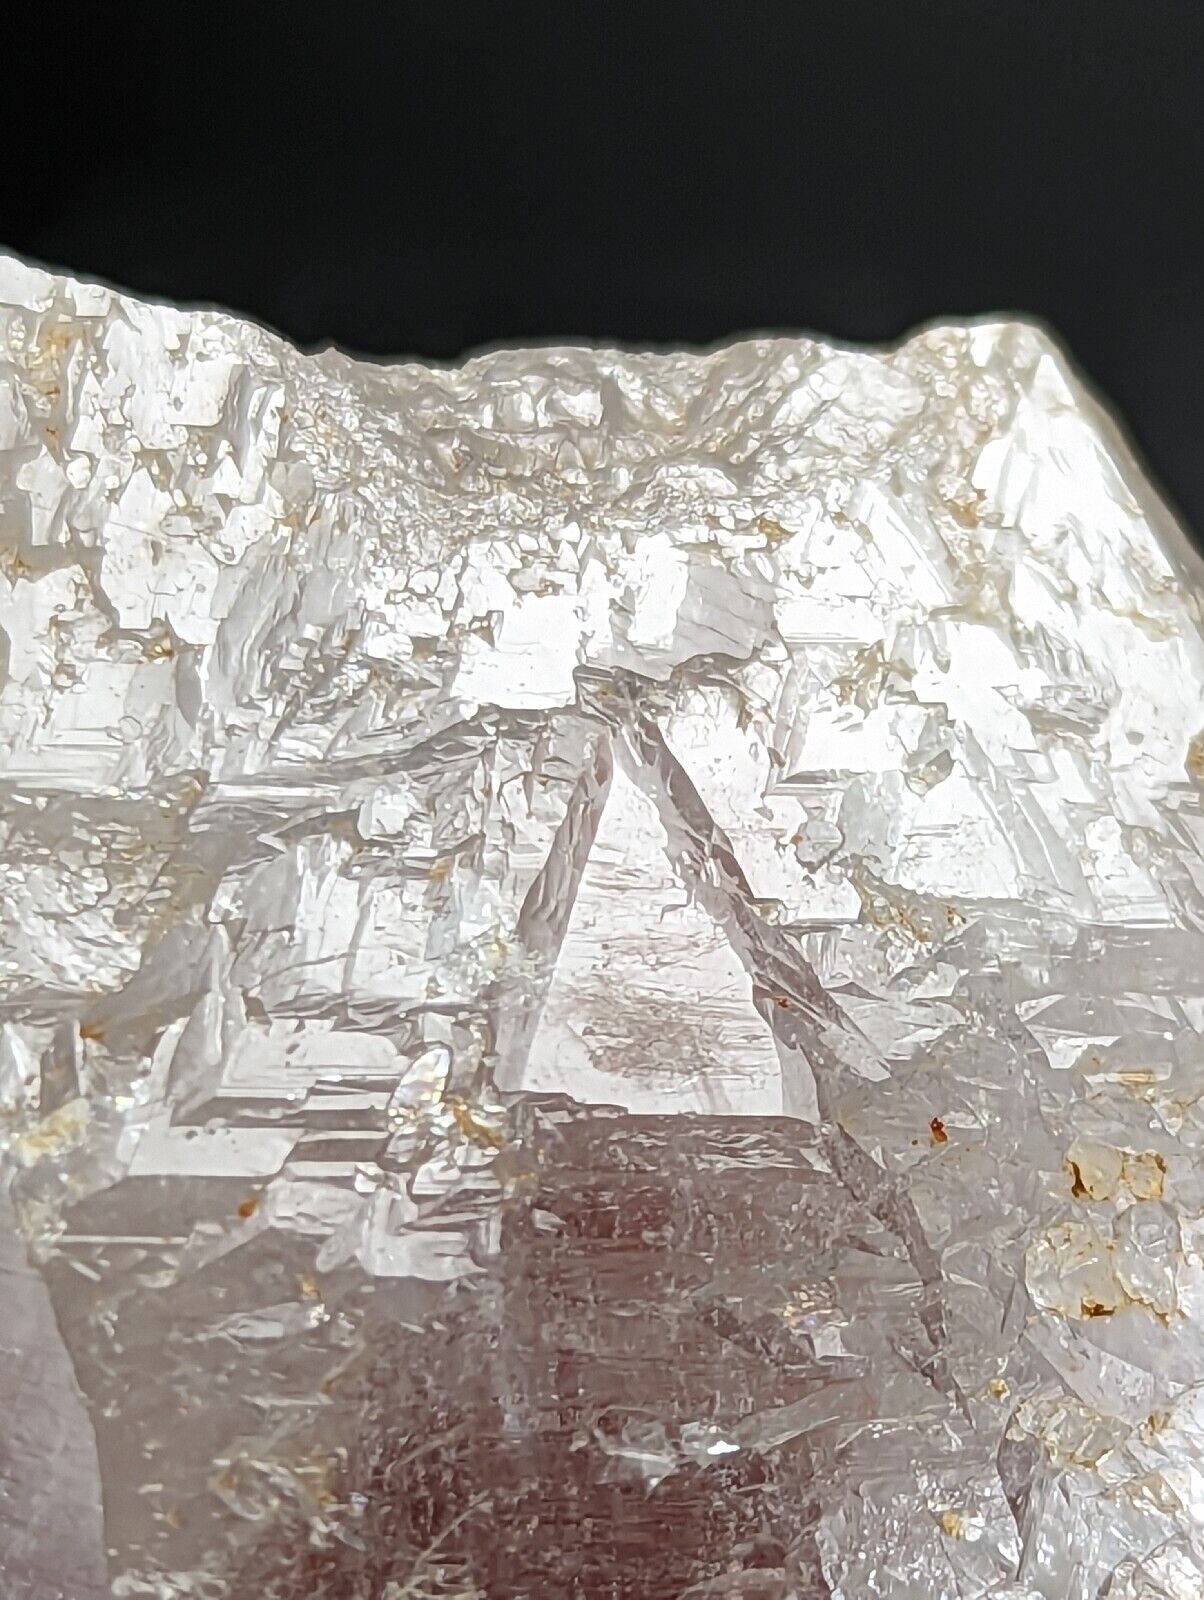 Record Keeper Quartz Crystal - Montgomery County, Arkansas, etched triangles